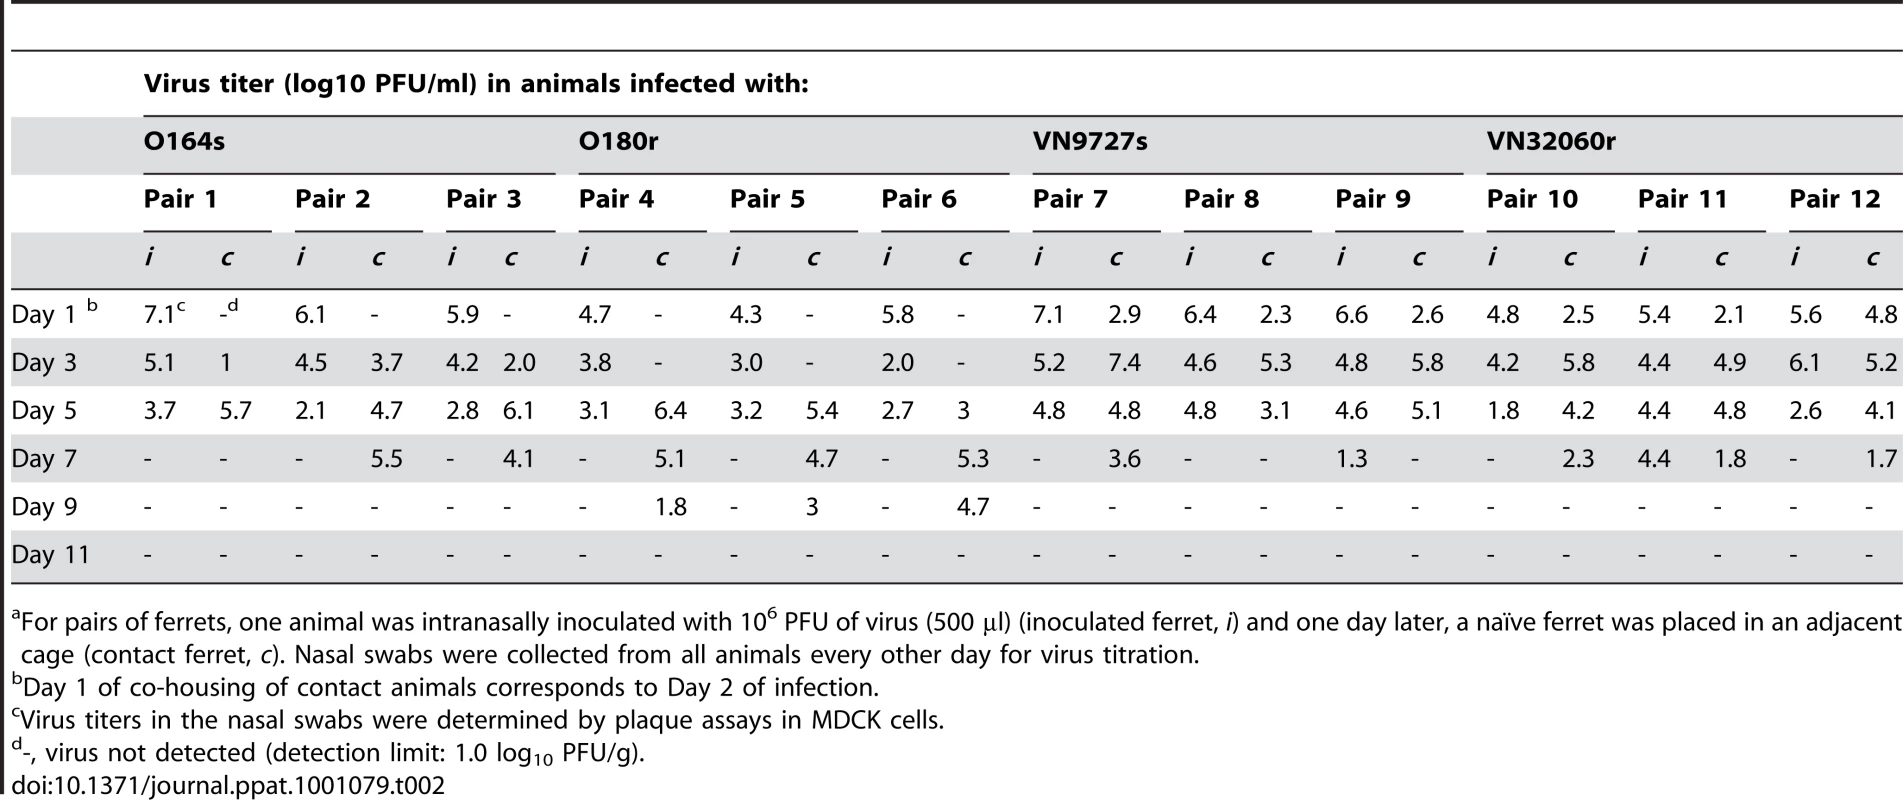 Virus titers in the nasal swabs of inoculated and contact ferrets<em class=&quot;ref&quot;>a</em>.